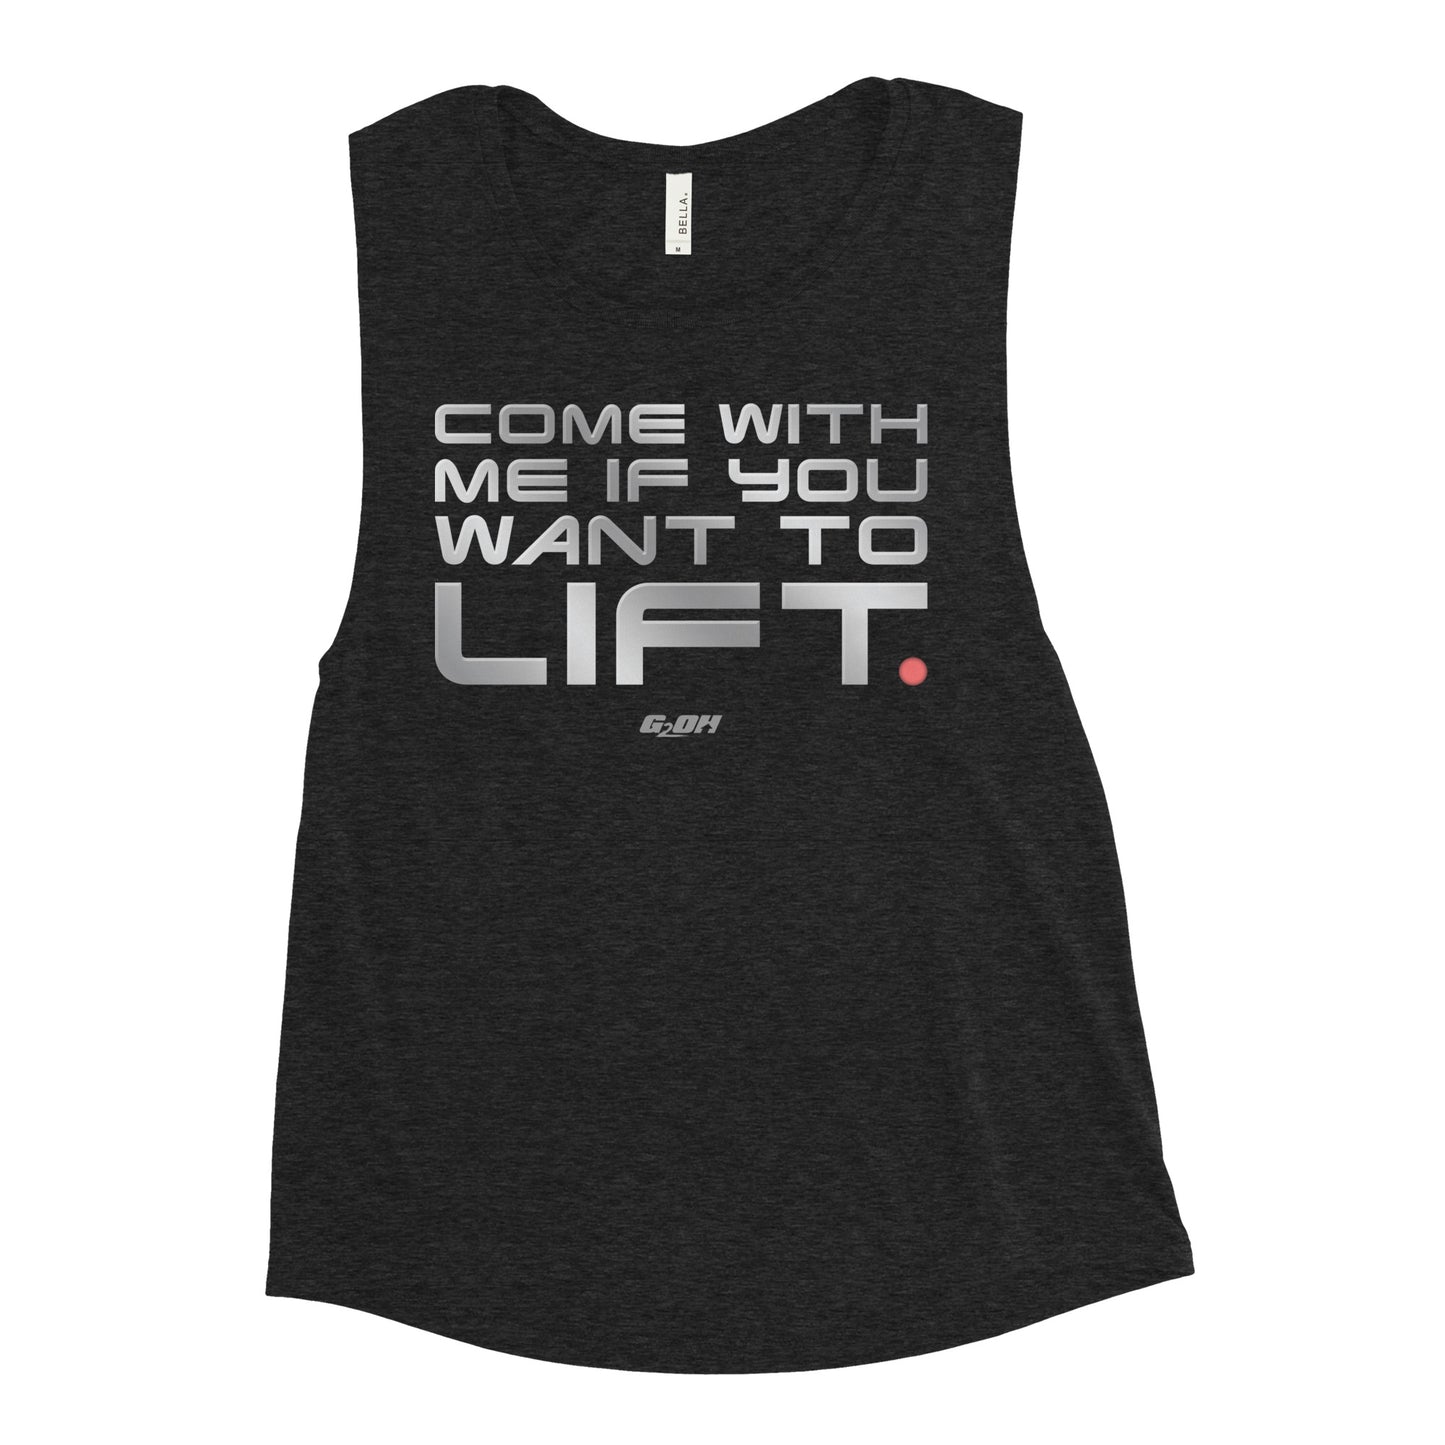 Come With Me If You Want To Lift Women's Muscle Tank